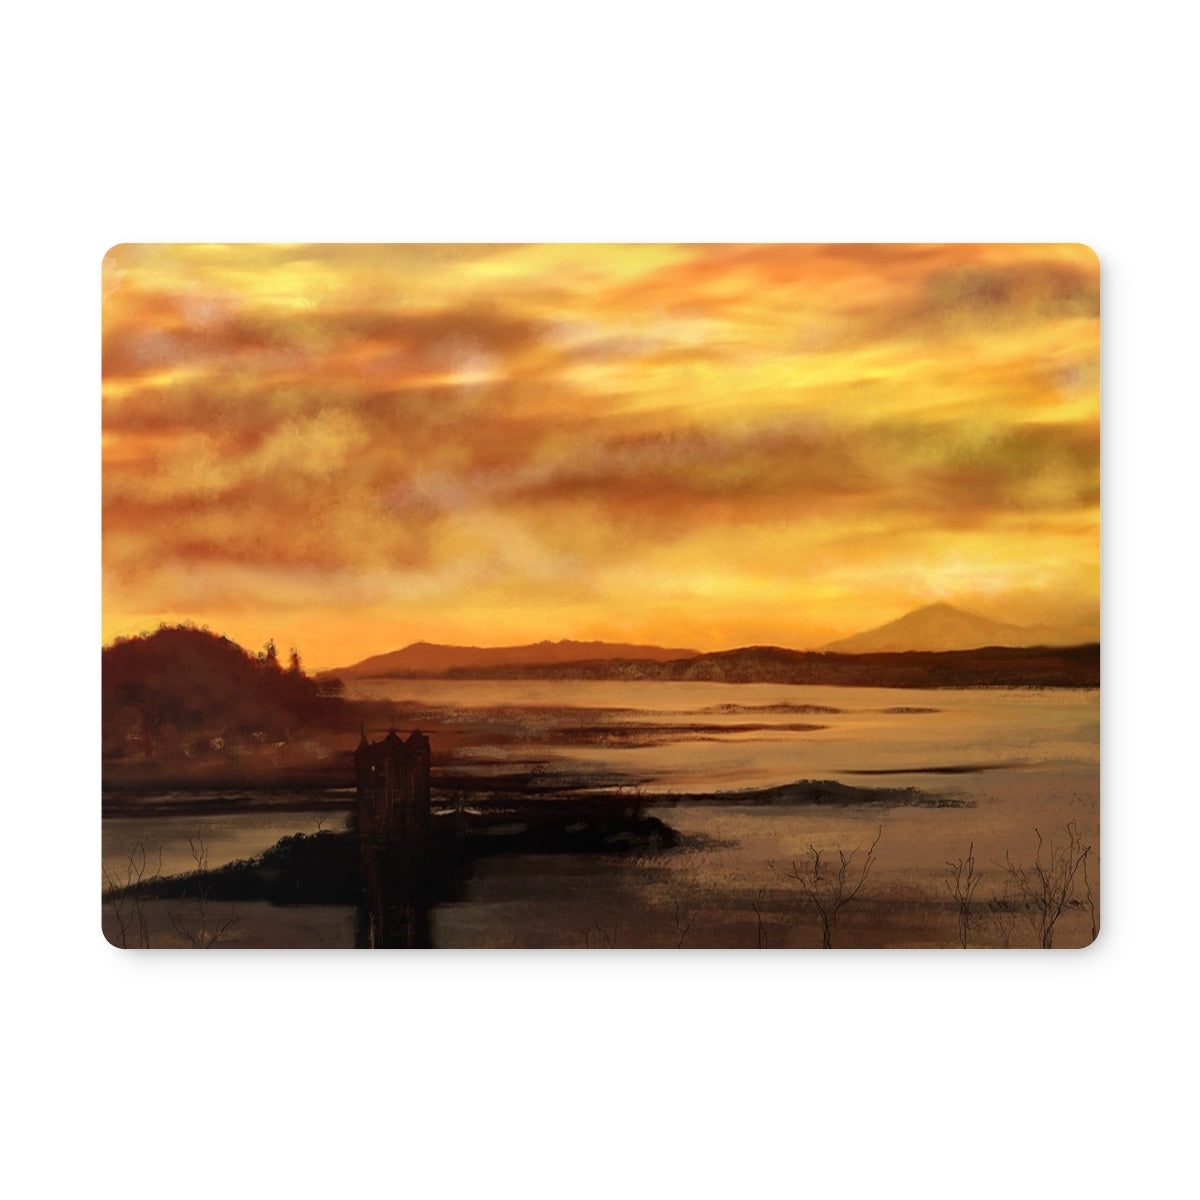 Castle Stalker Dusk Art Gifts Placemat-Placemats-Historic & Iconic Scotland Art Gallery-4 Placemats-Paintings, Prints, Homeware, Art Gifts From Scotland By Scottish Artist Kevin Hunter